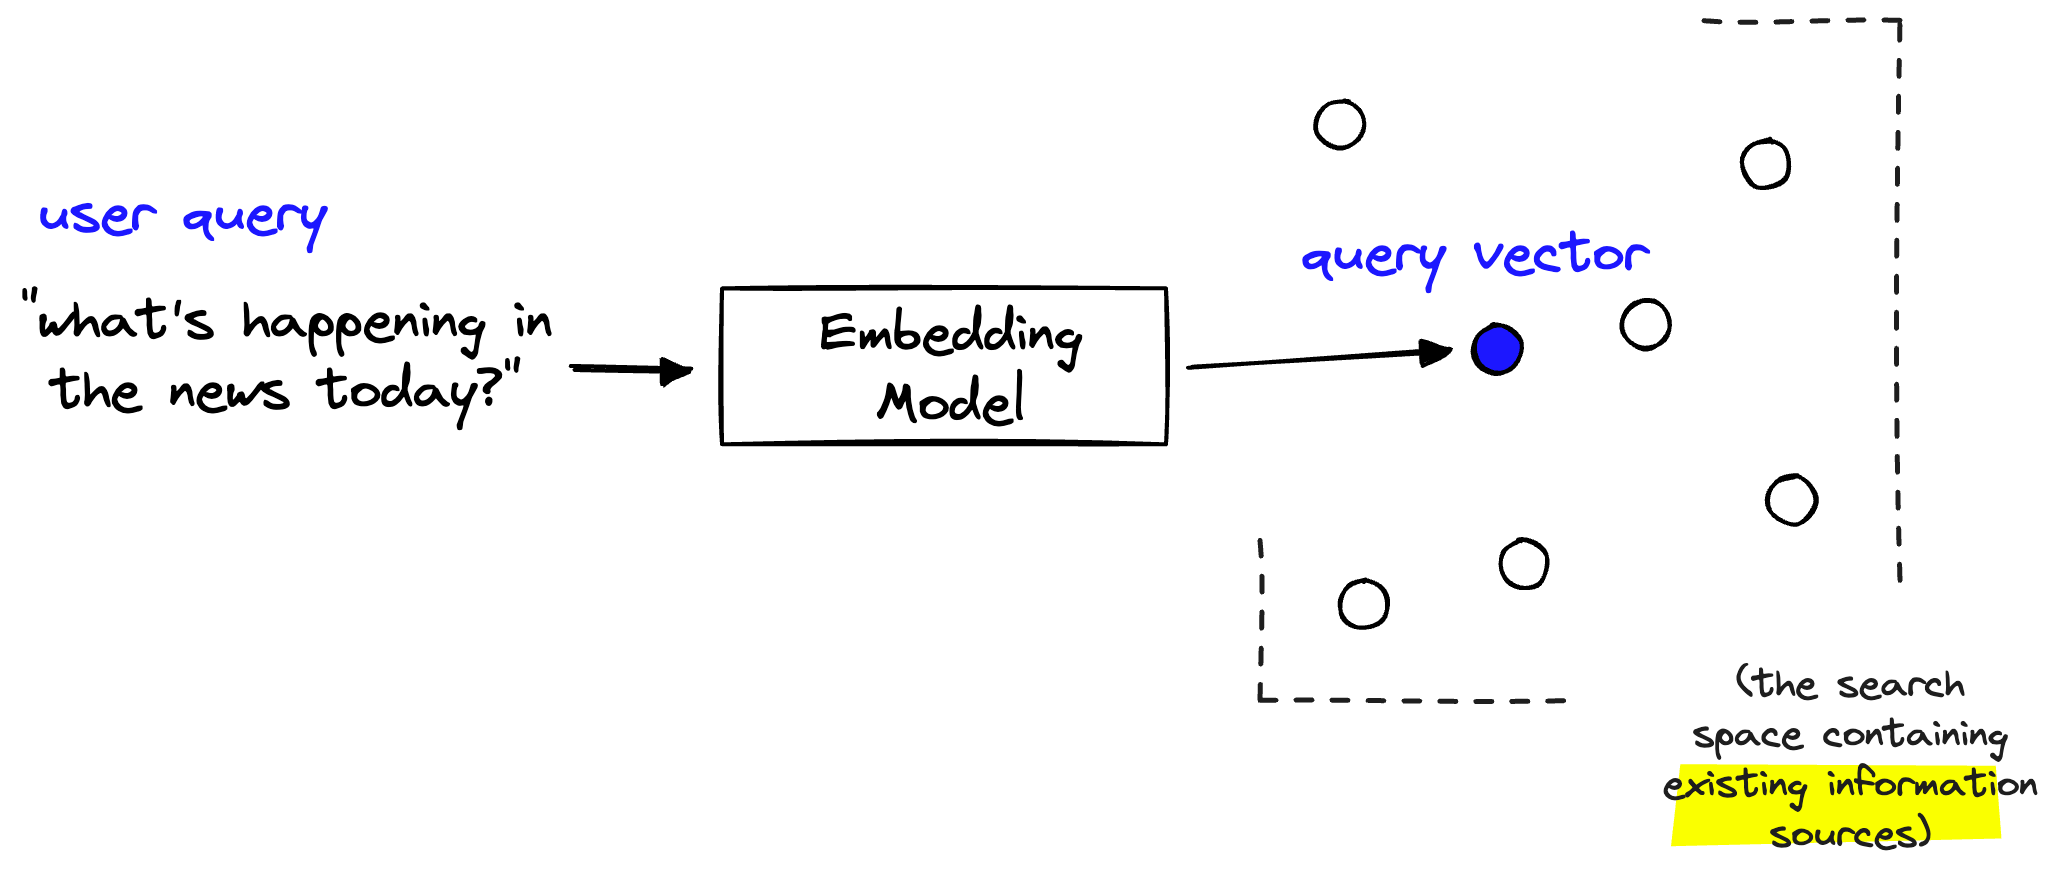 Embedding models translate human-readable text into machine-readable and searchable vectors.